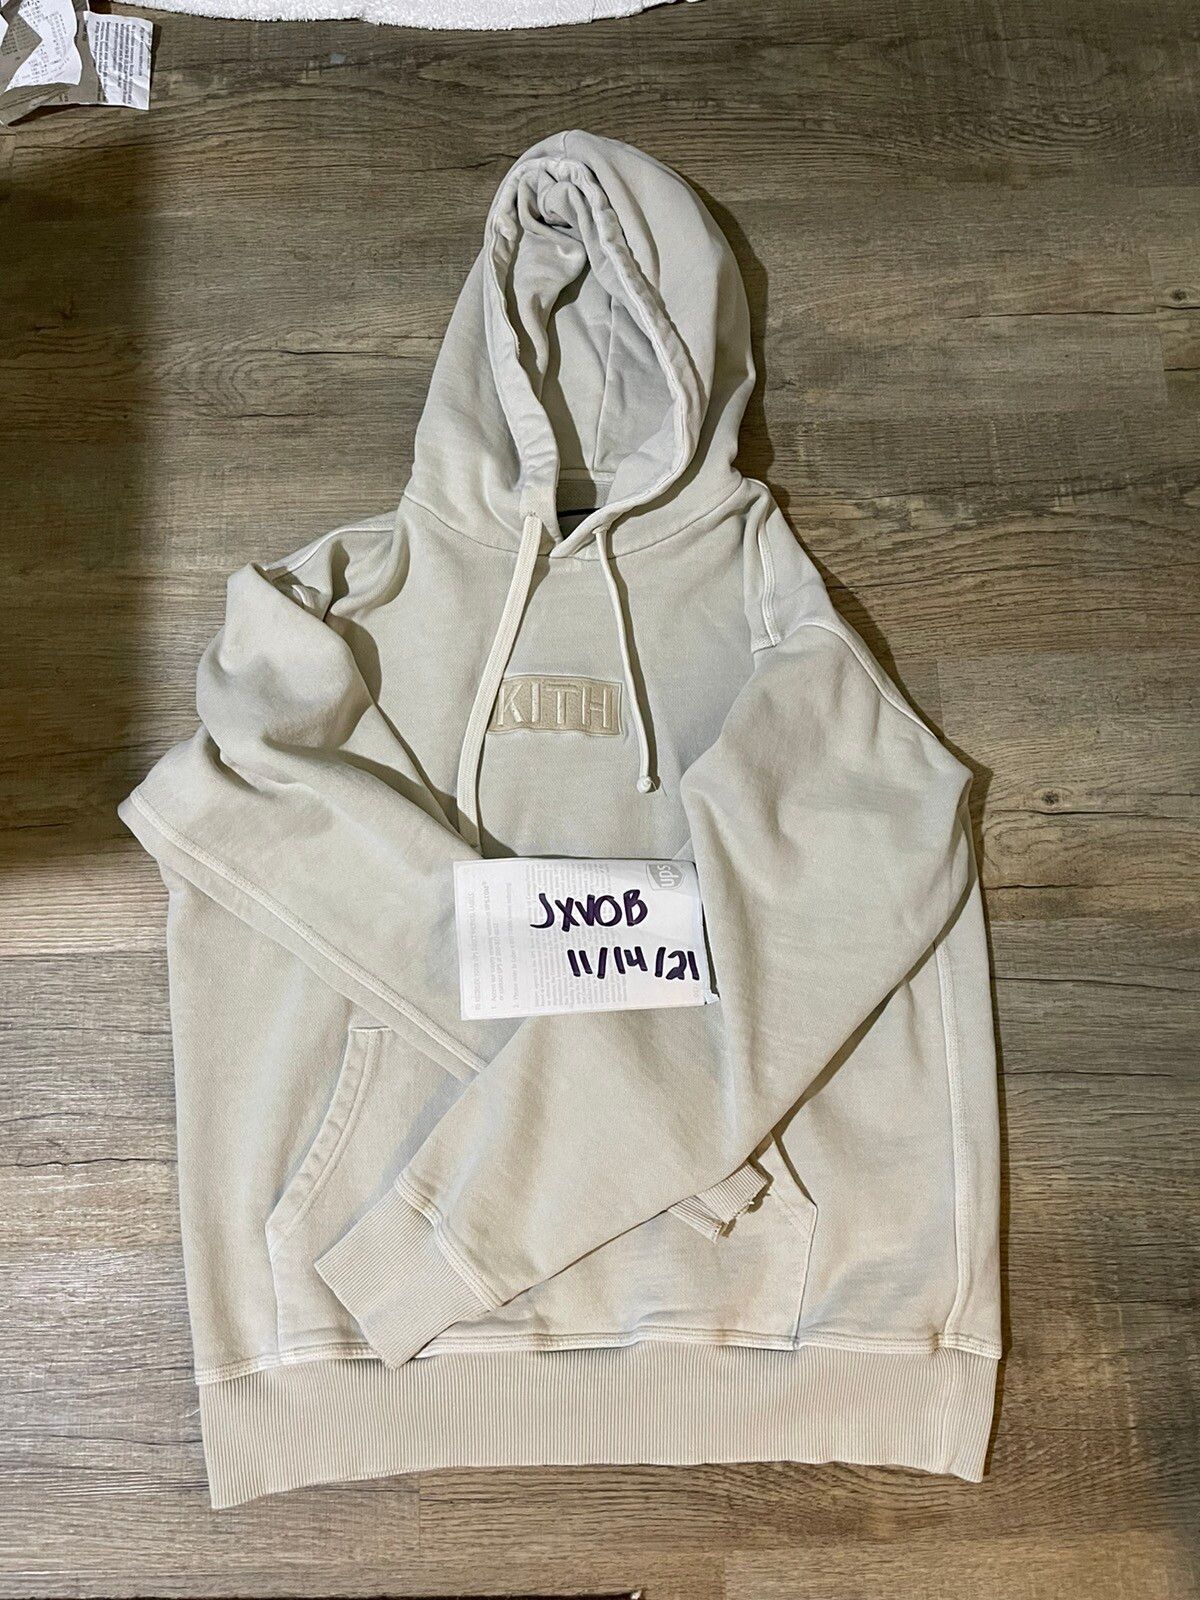 Kith Kith Classic embroidered Box Logo Hoodie | Grailed